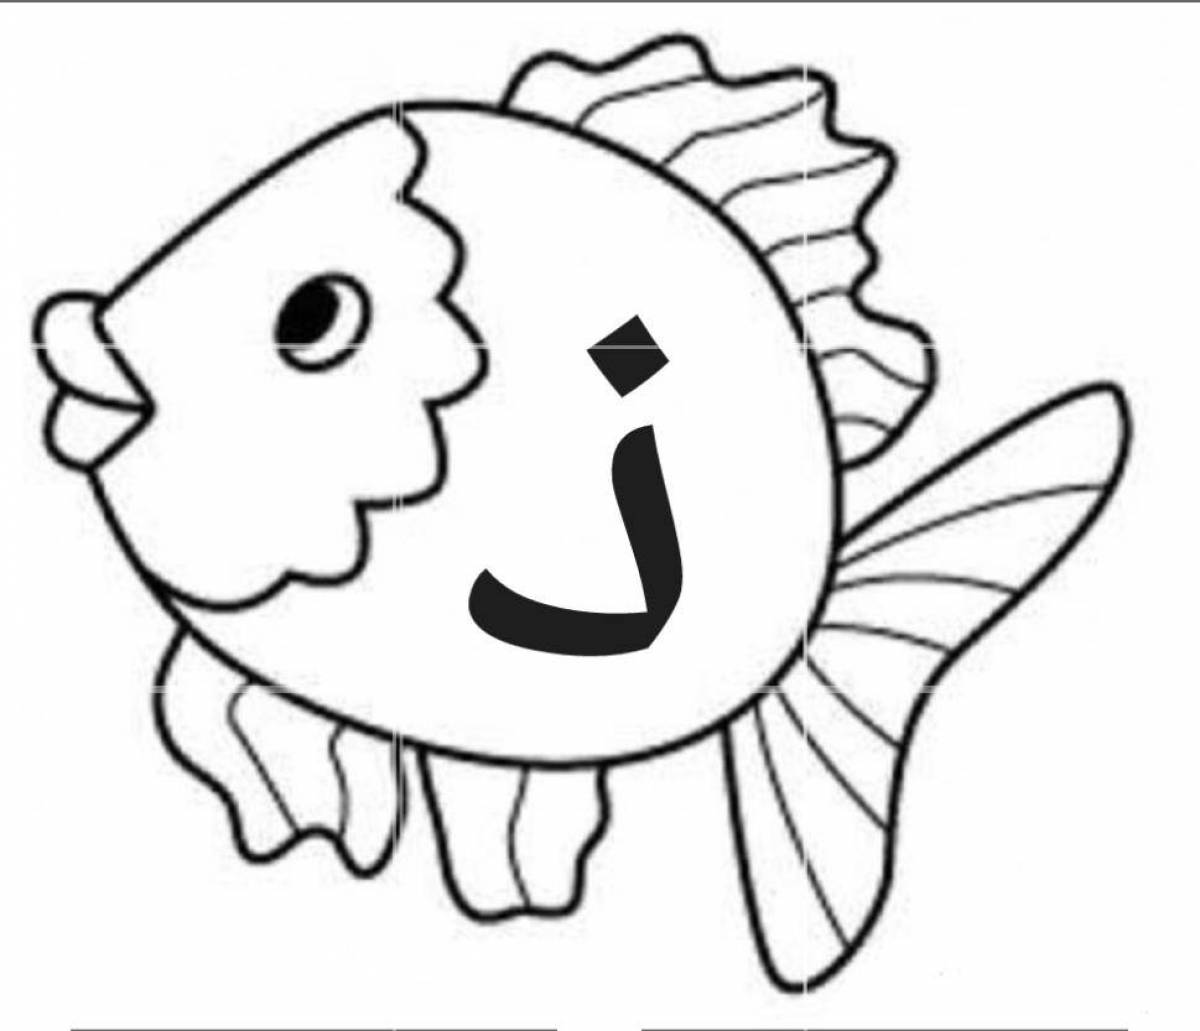 Incredible fish coloring book for 2-3 year olds